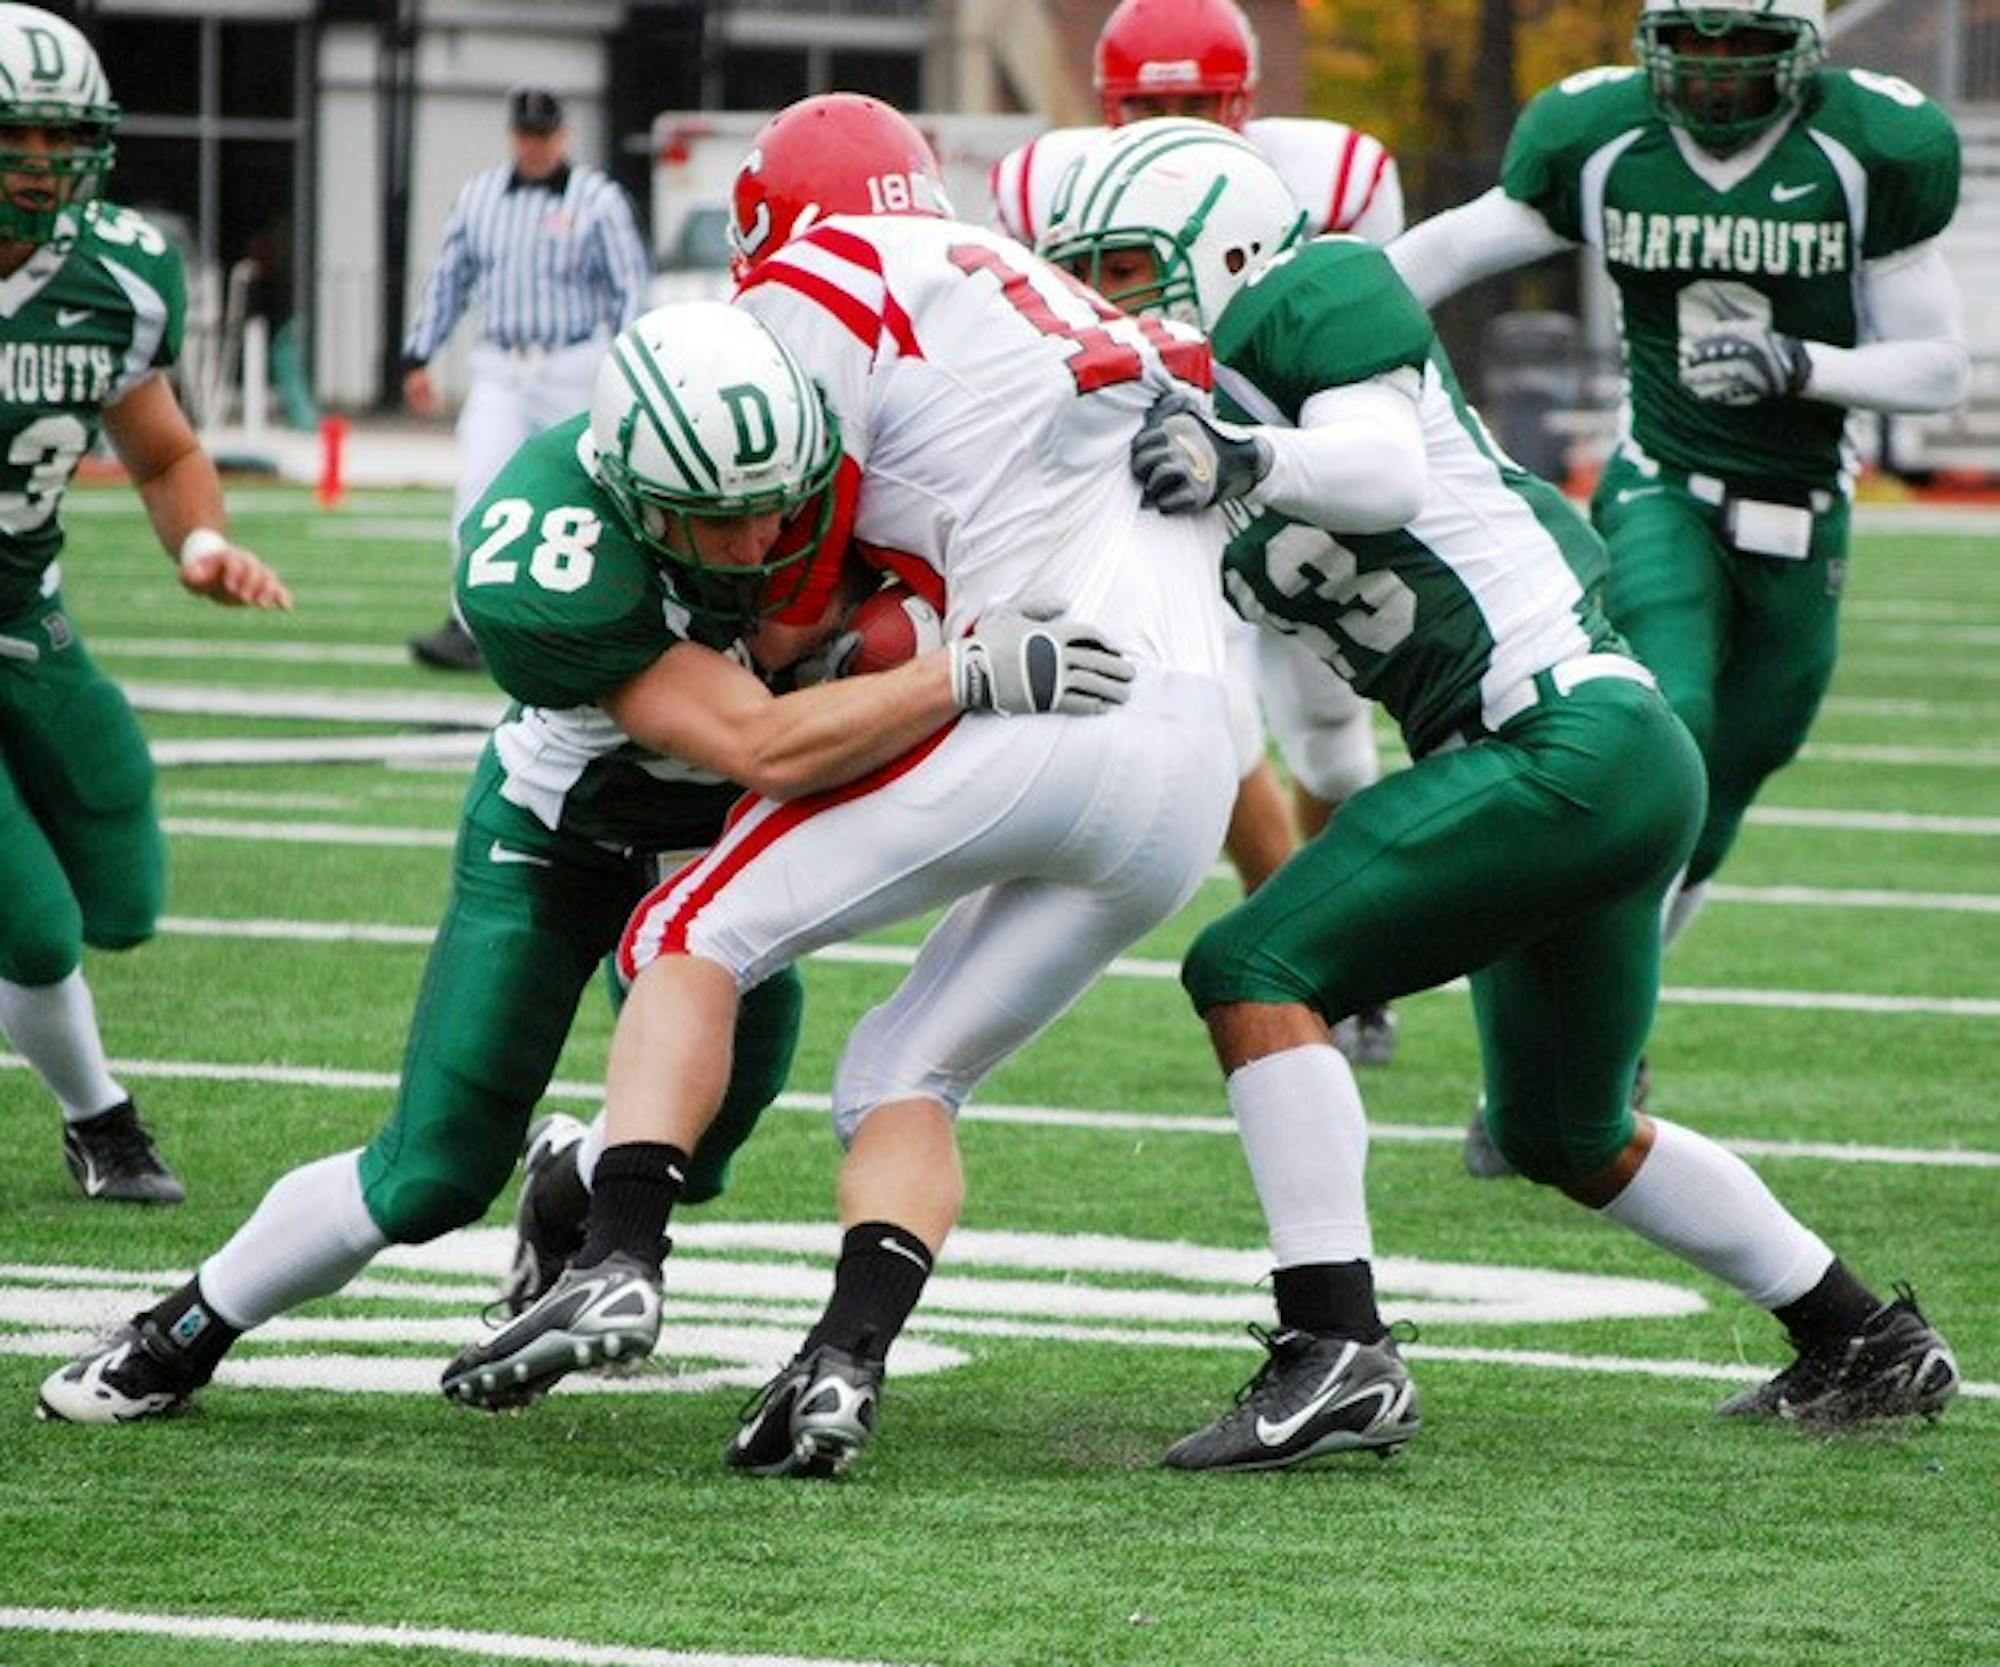 Dartmouth football will look to solidify its third-place standing this weekend.